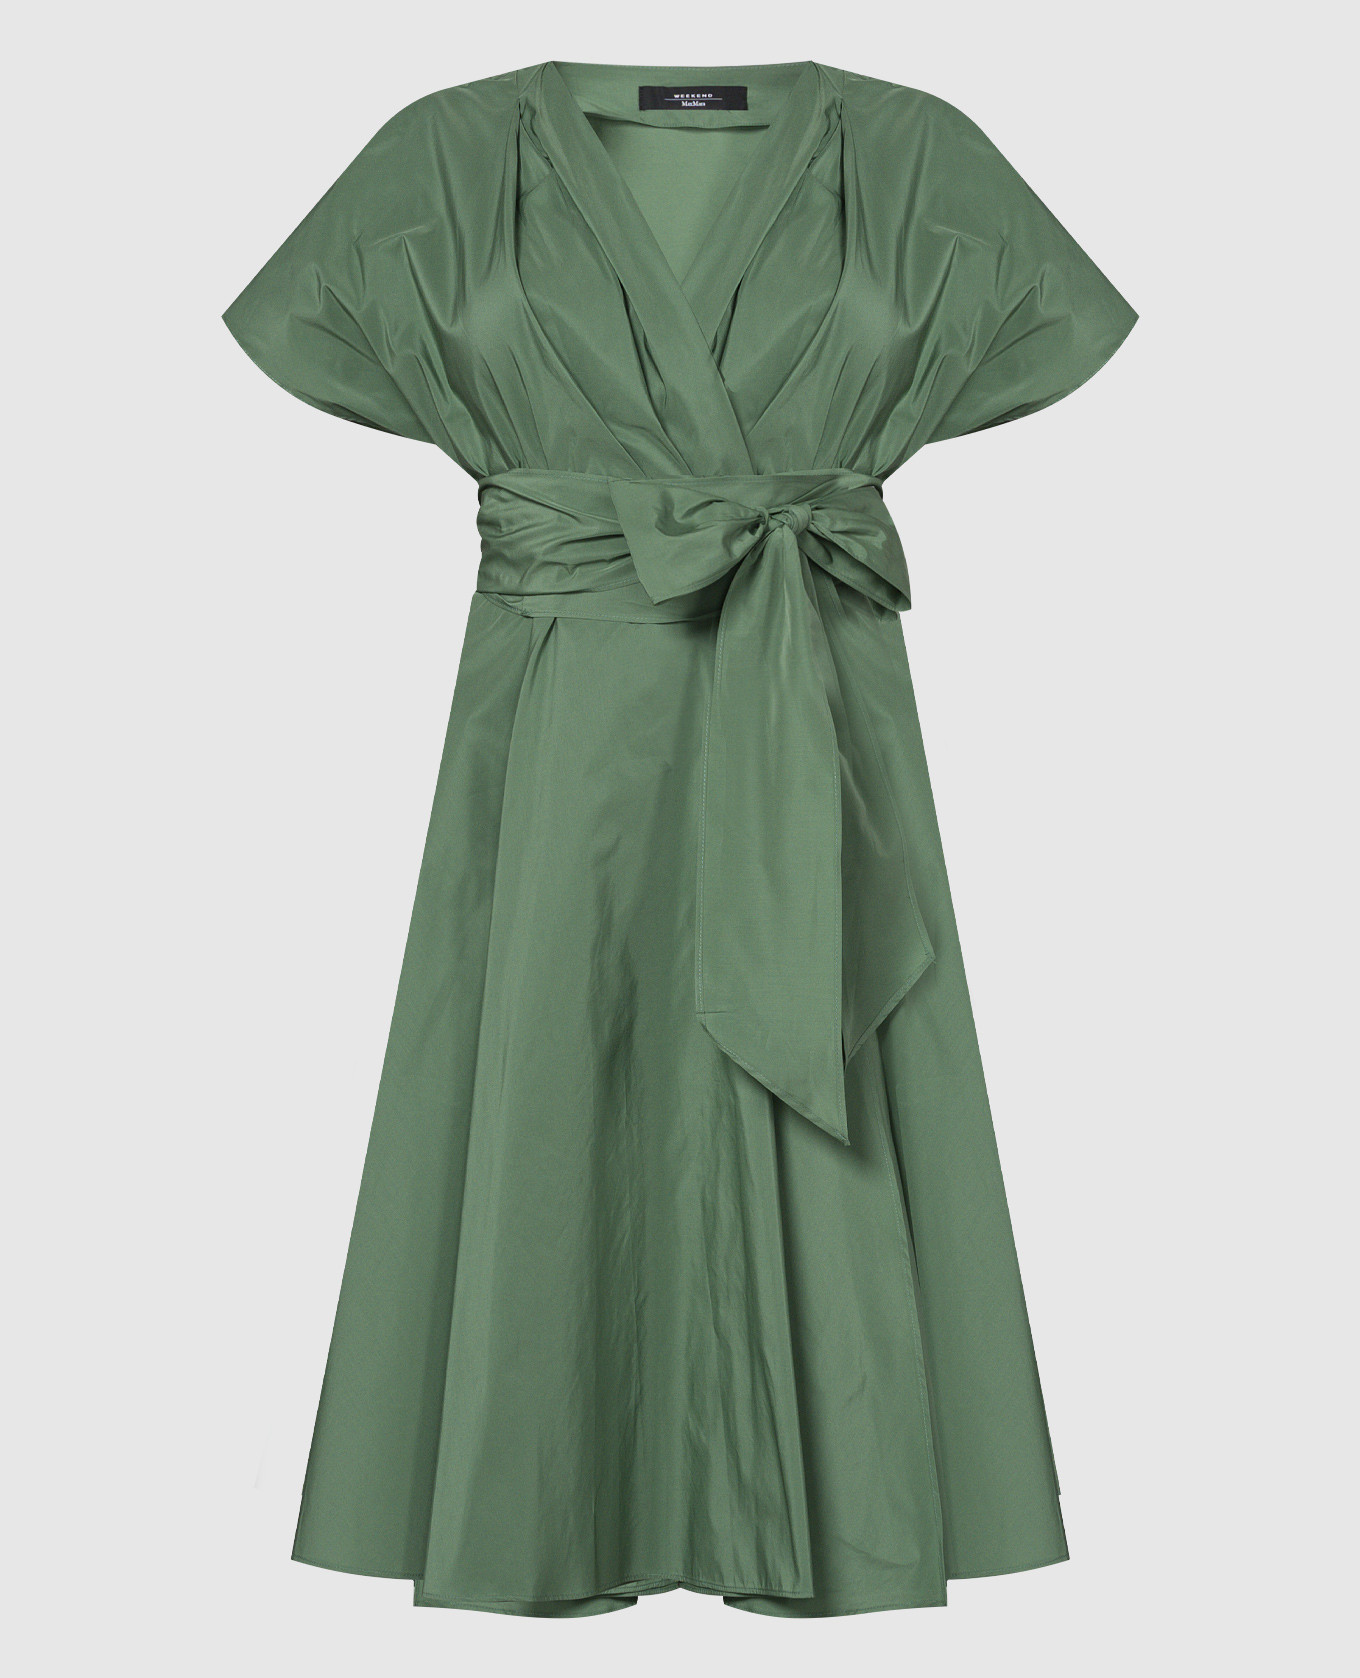 GIAMBO green dress for smell